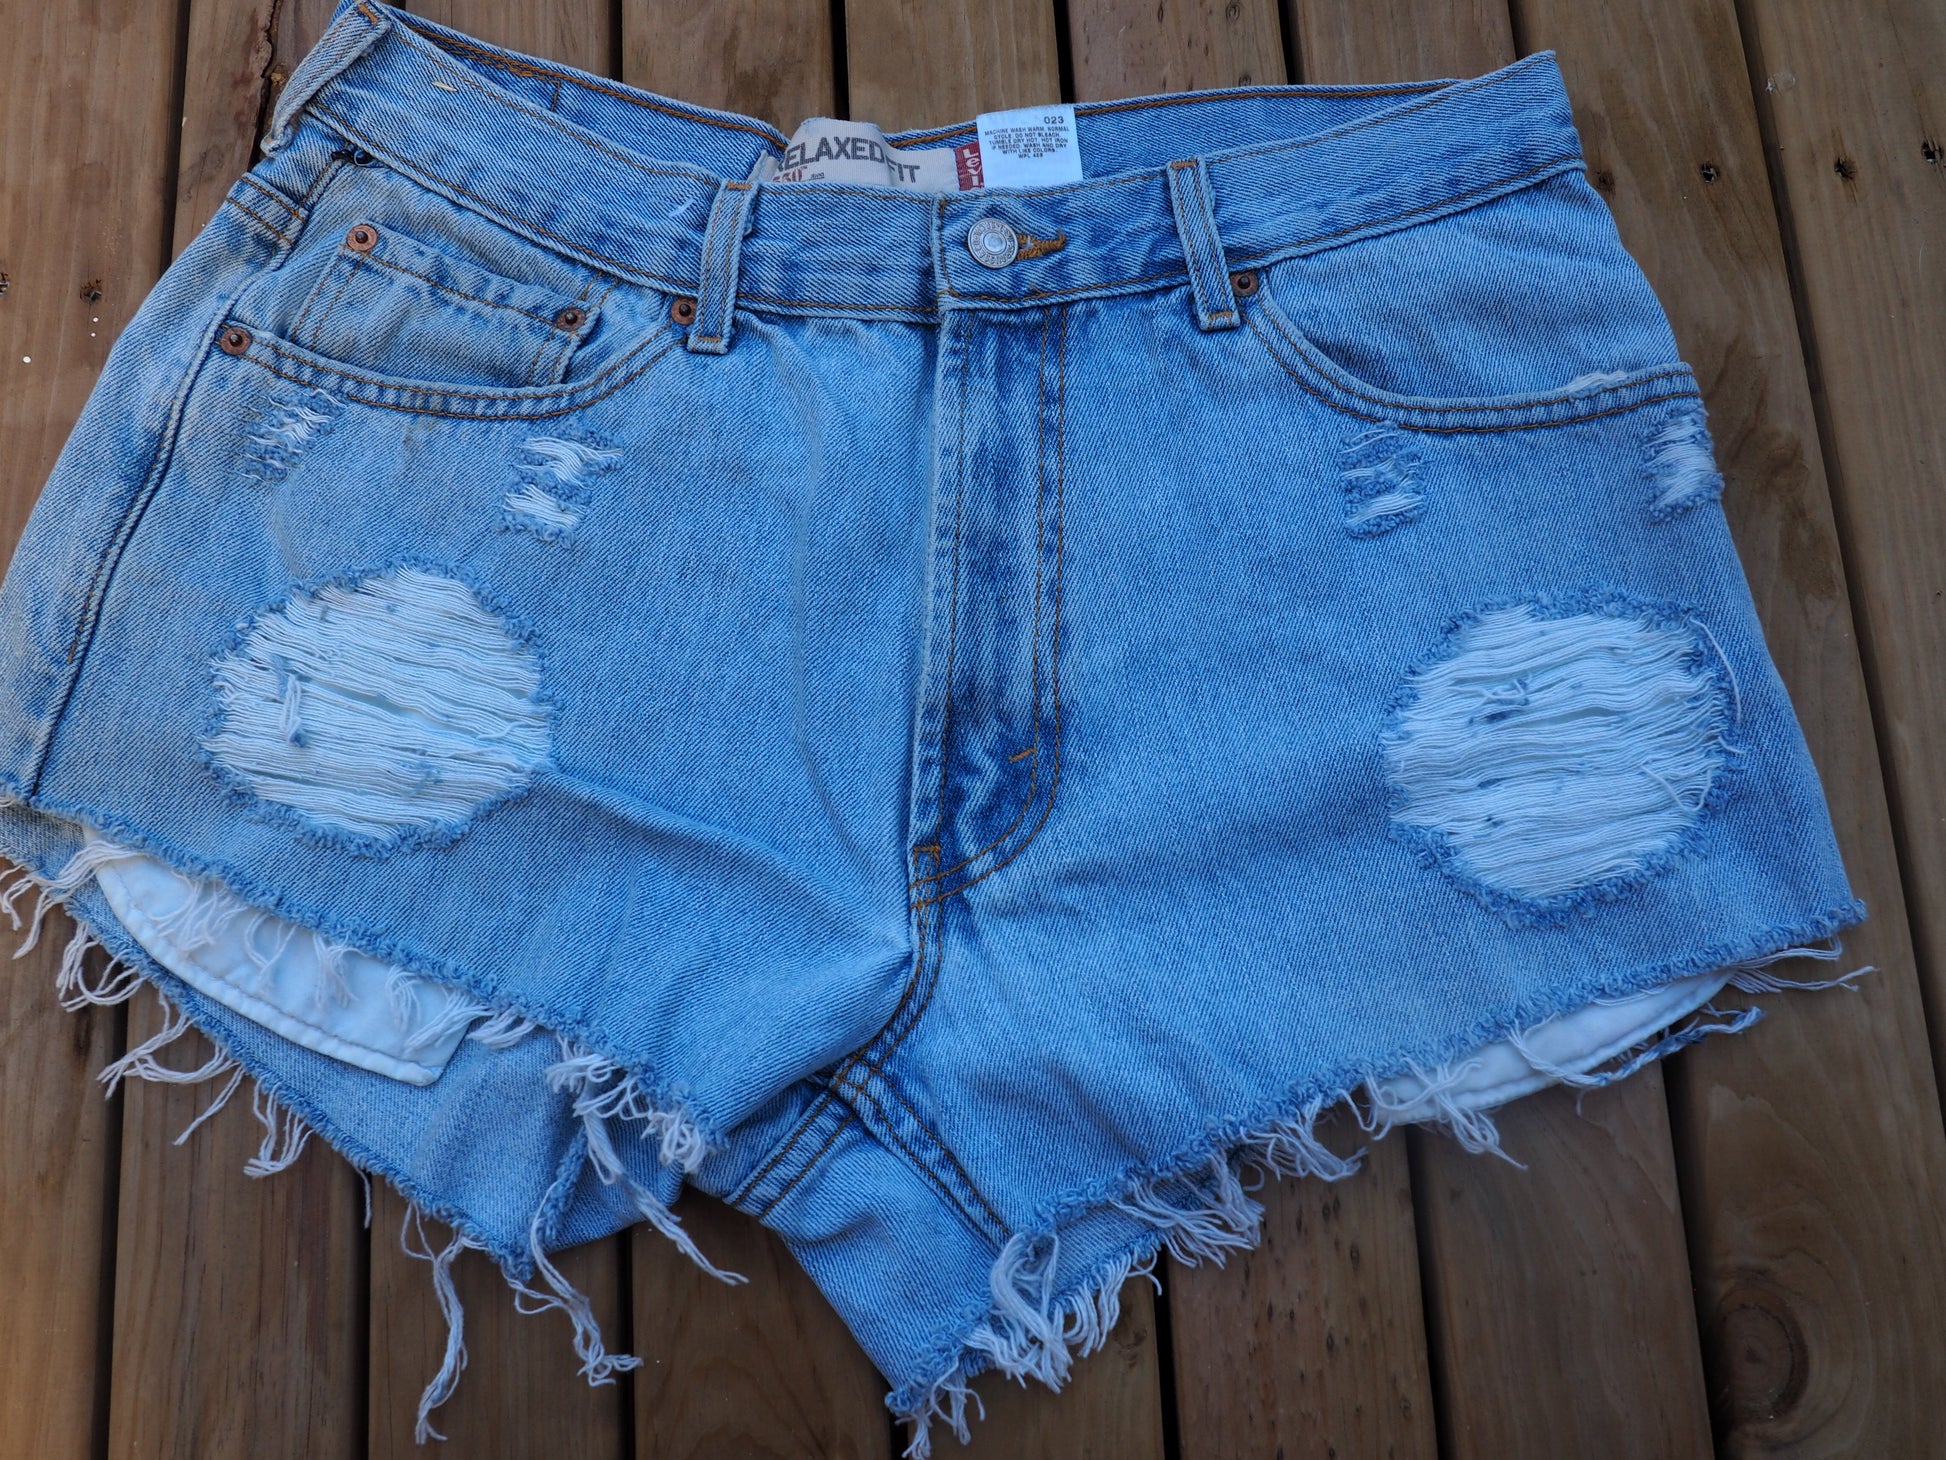 Vintage distressed Levis cut off shorts, loose fit for women